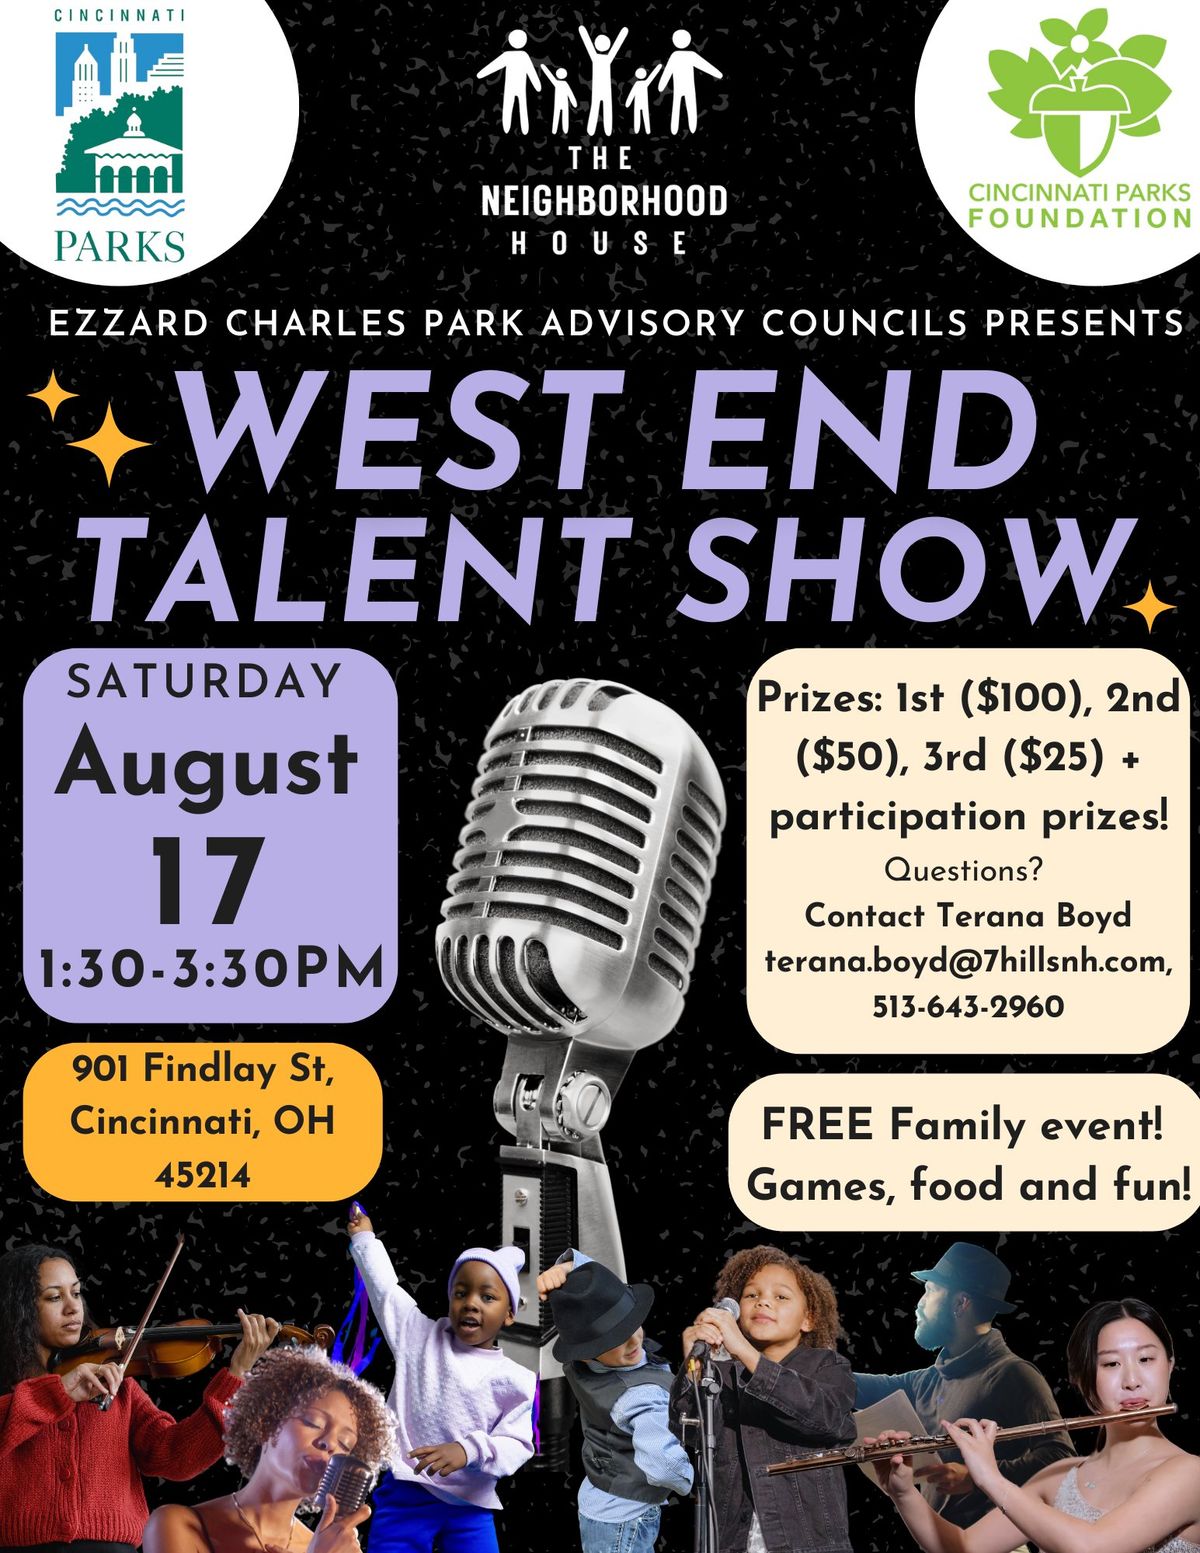 West End Talent Show! FREE Family Event!